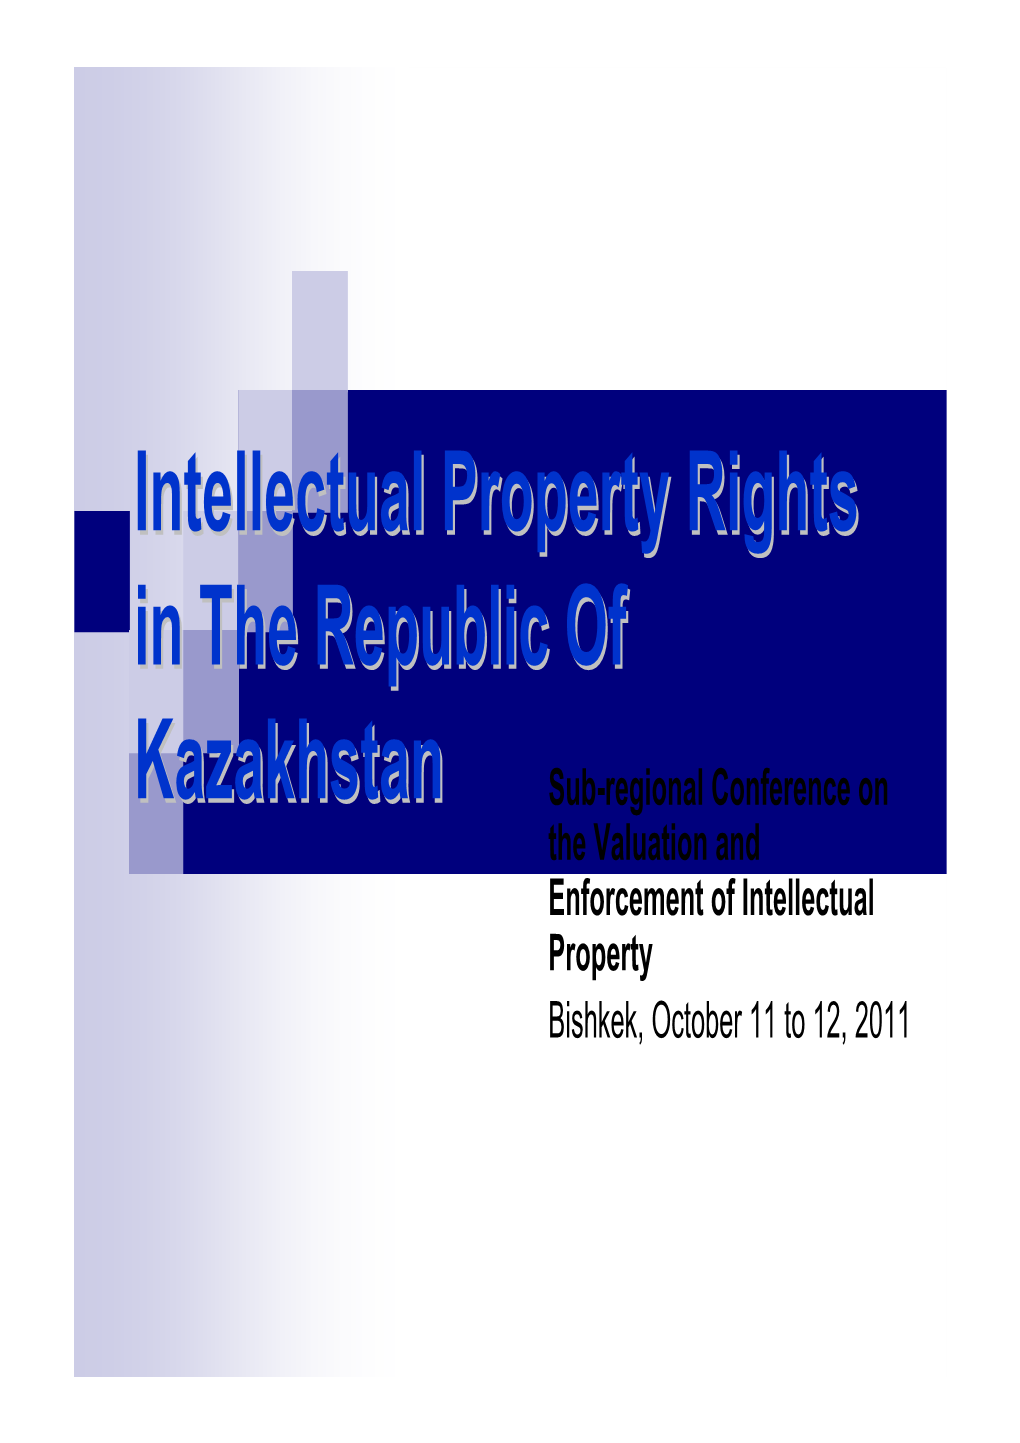 Intellectual Property Rights in the Republic of Kazakhstan